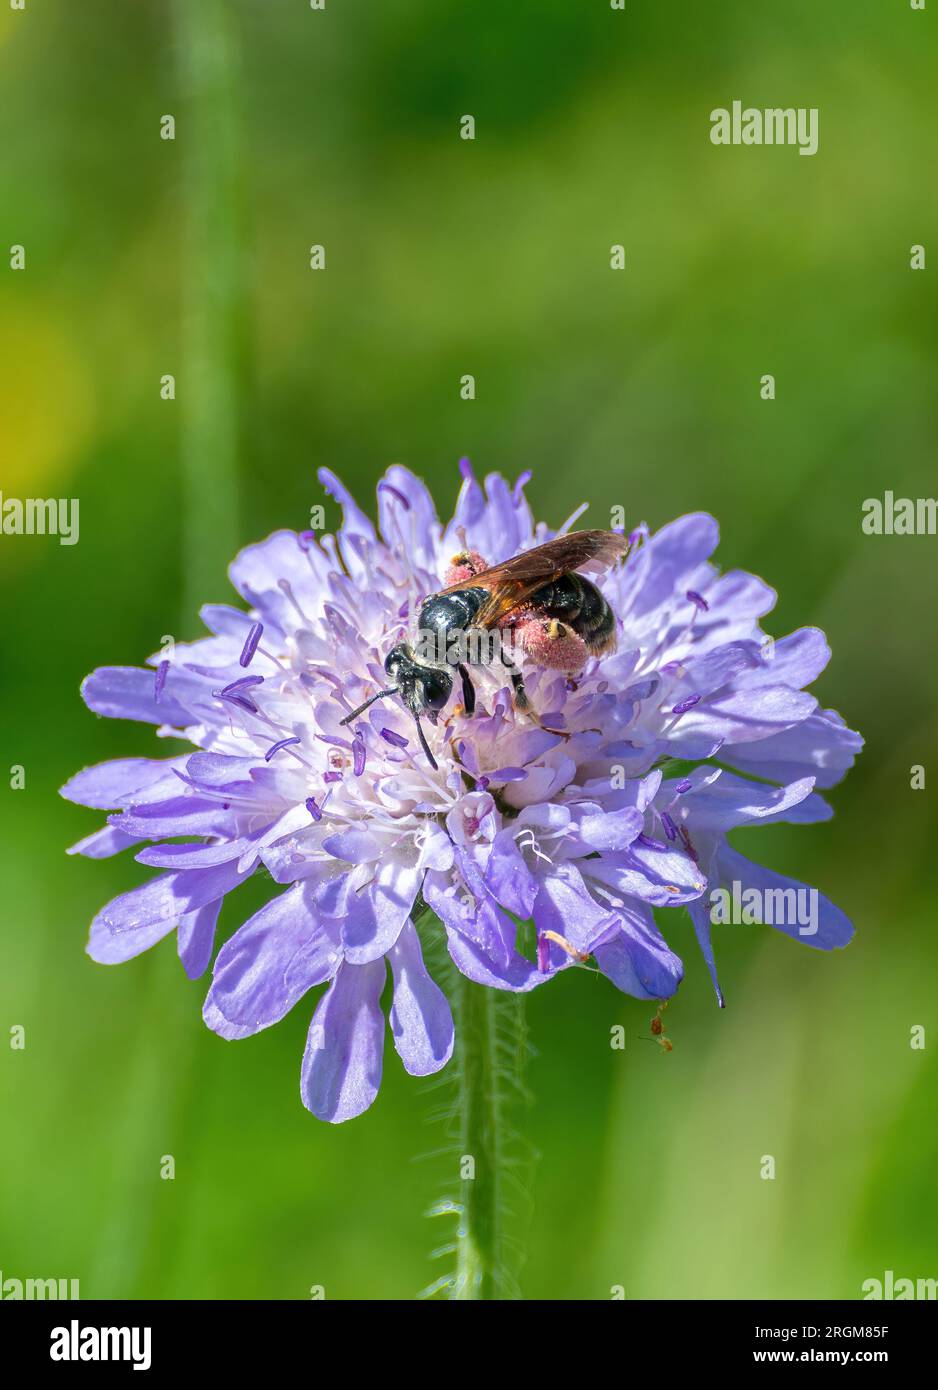 Large scabious mining bee (Andrena hattorfiana) with pink pollen grains on hind legs, on field scabious wildflower during summer, England, UK Stock Photo